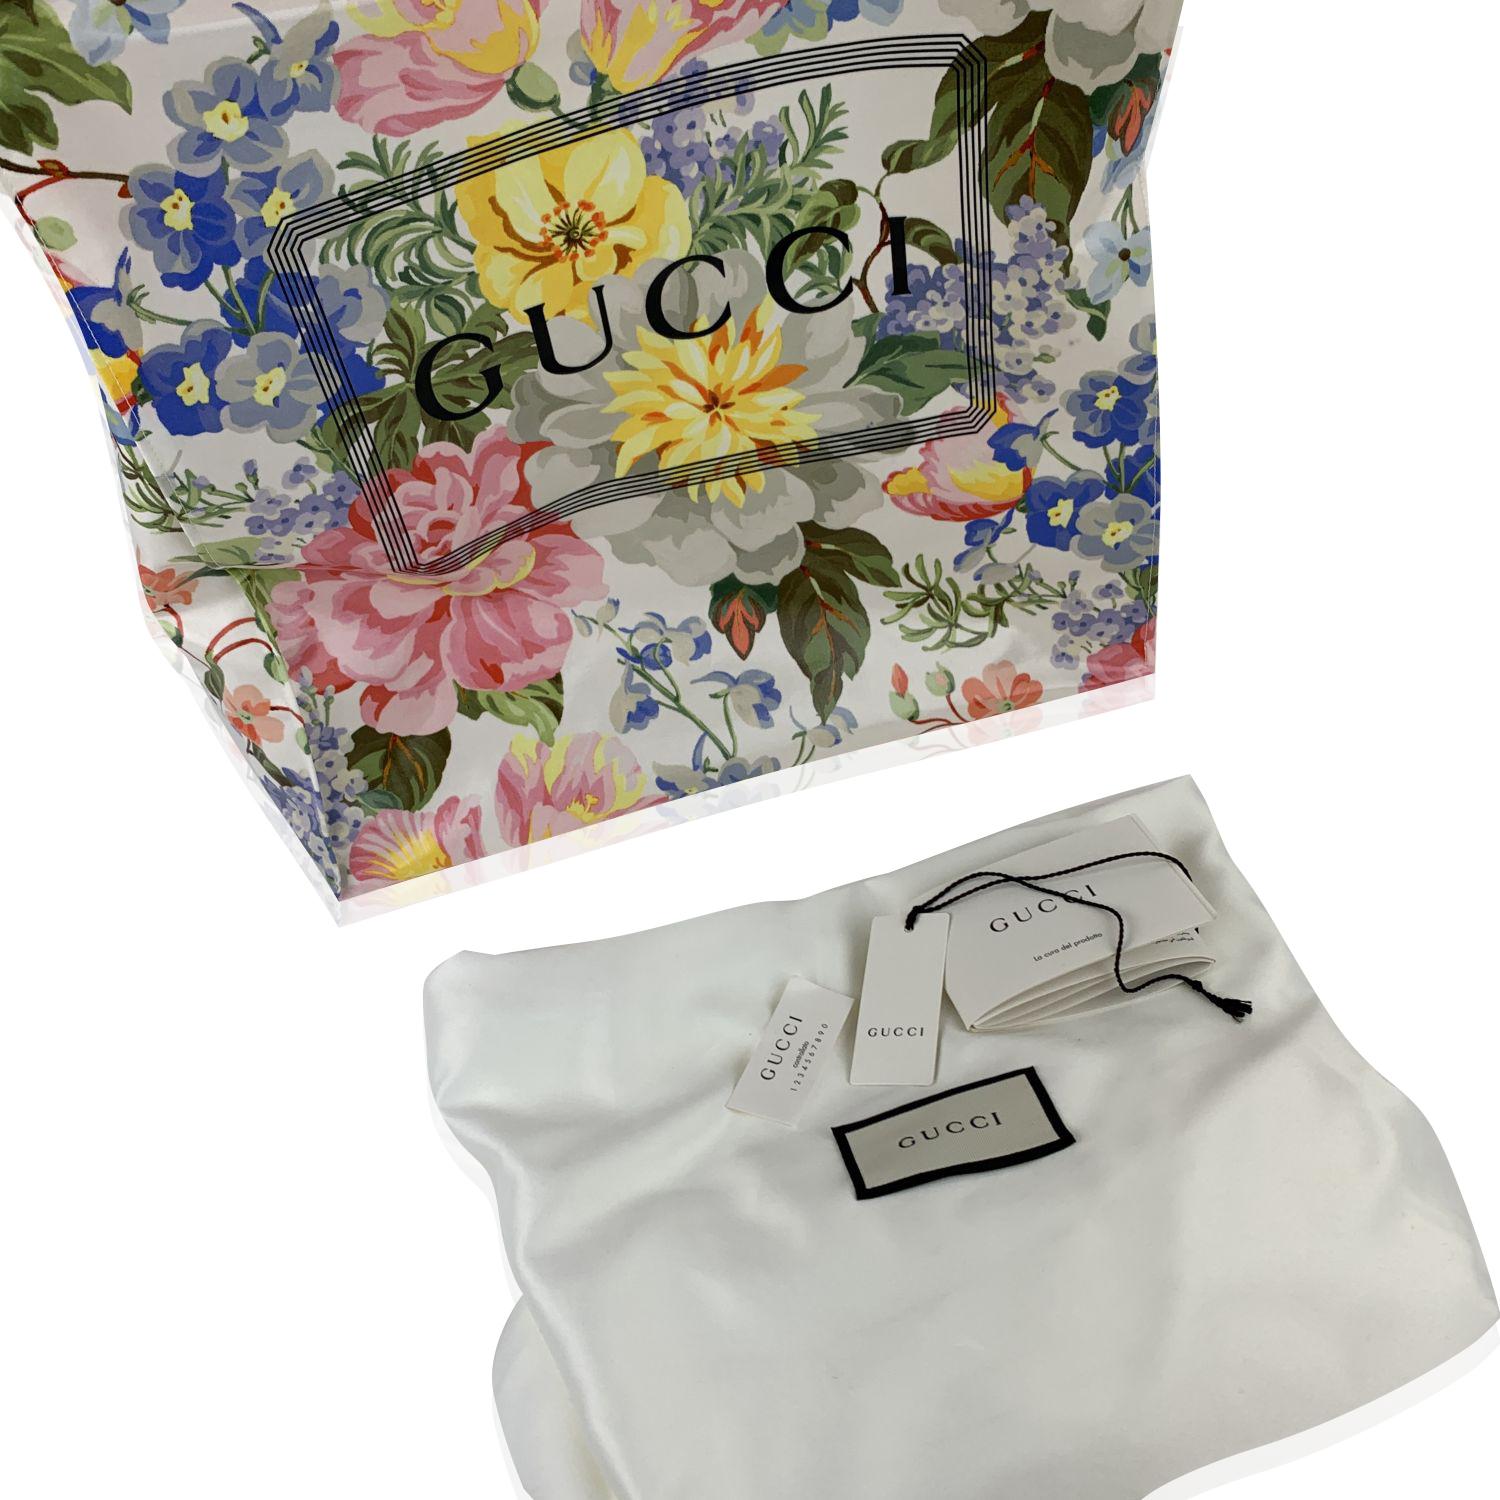 Beige Gucci Multicolor Floral Print Coated Cotton Large Tote Bag Never Used